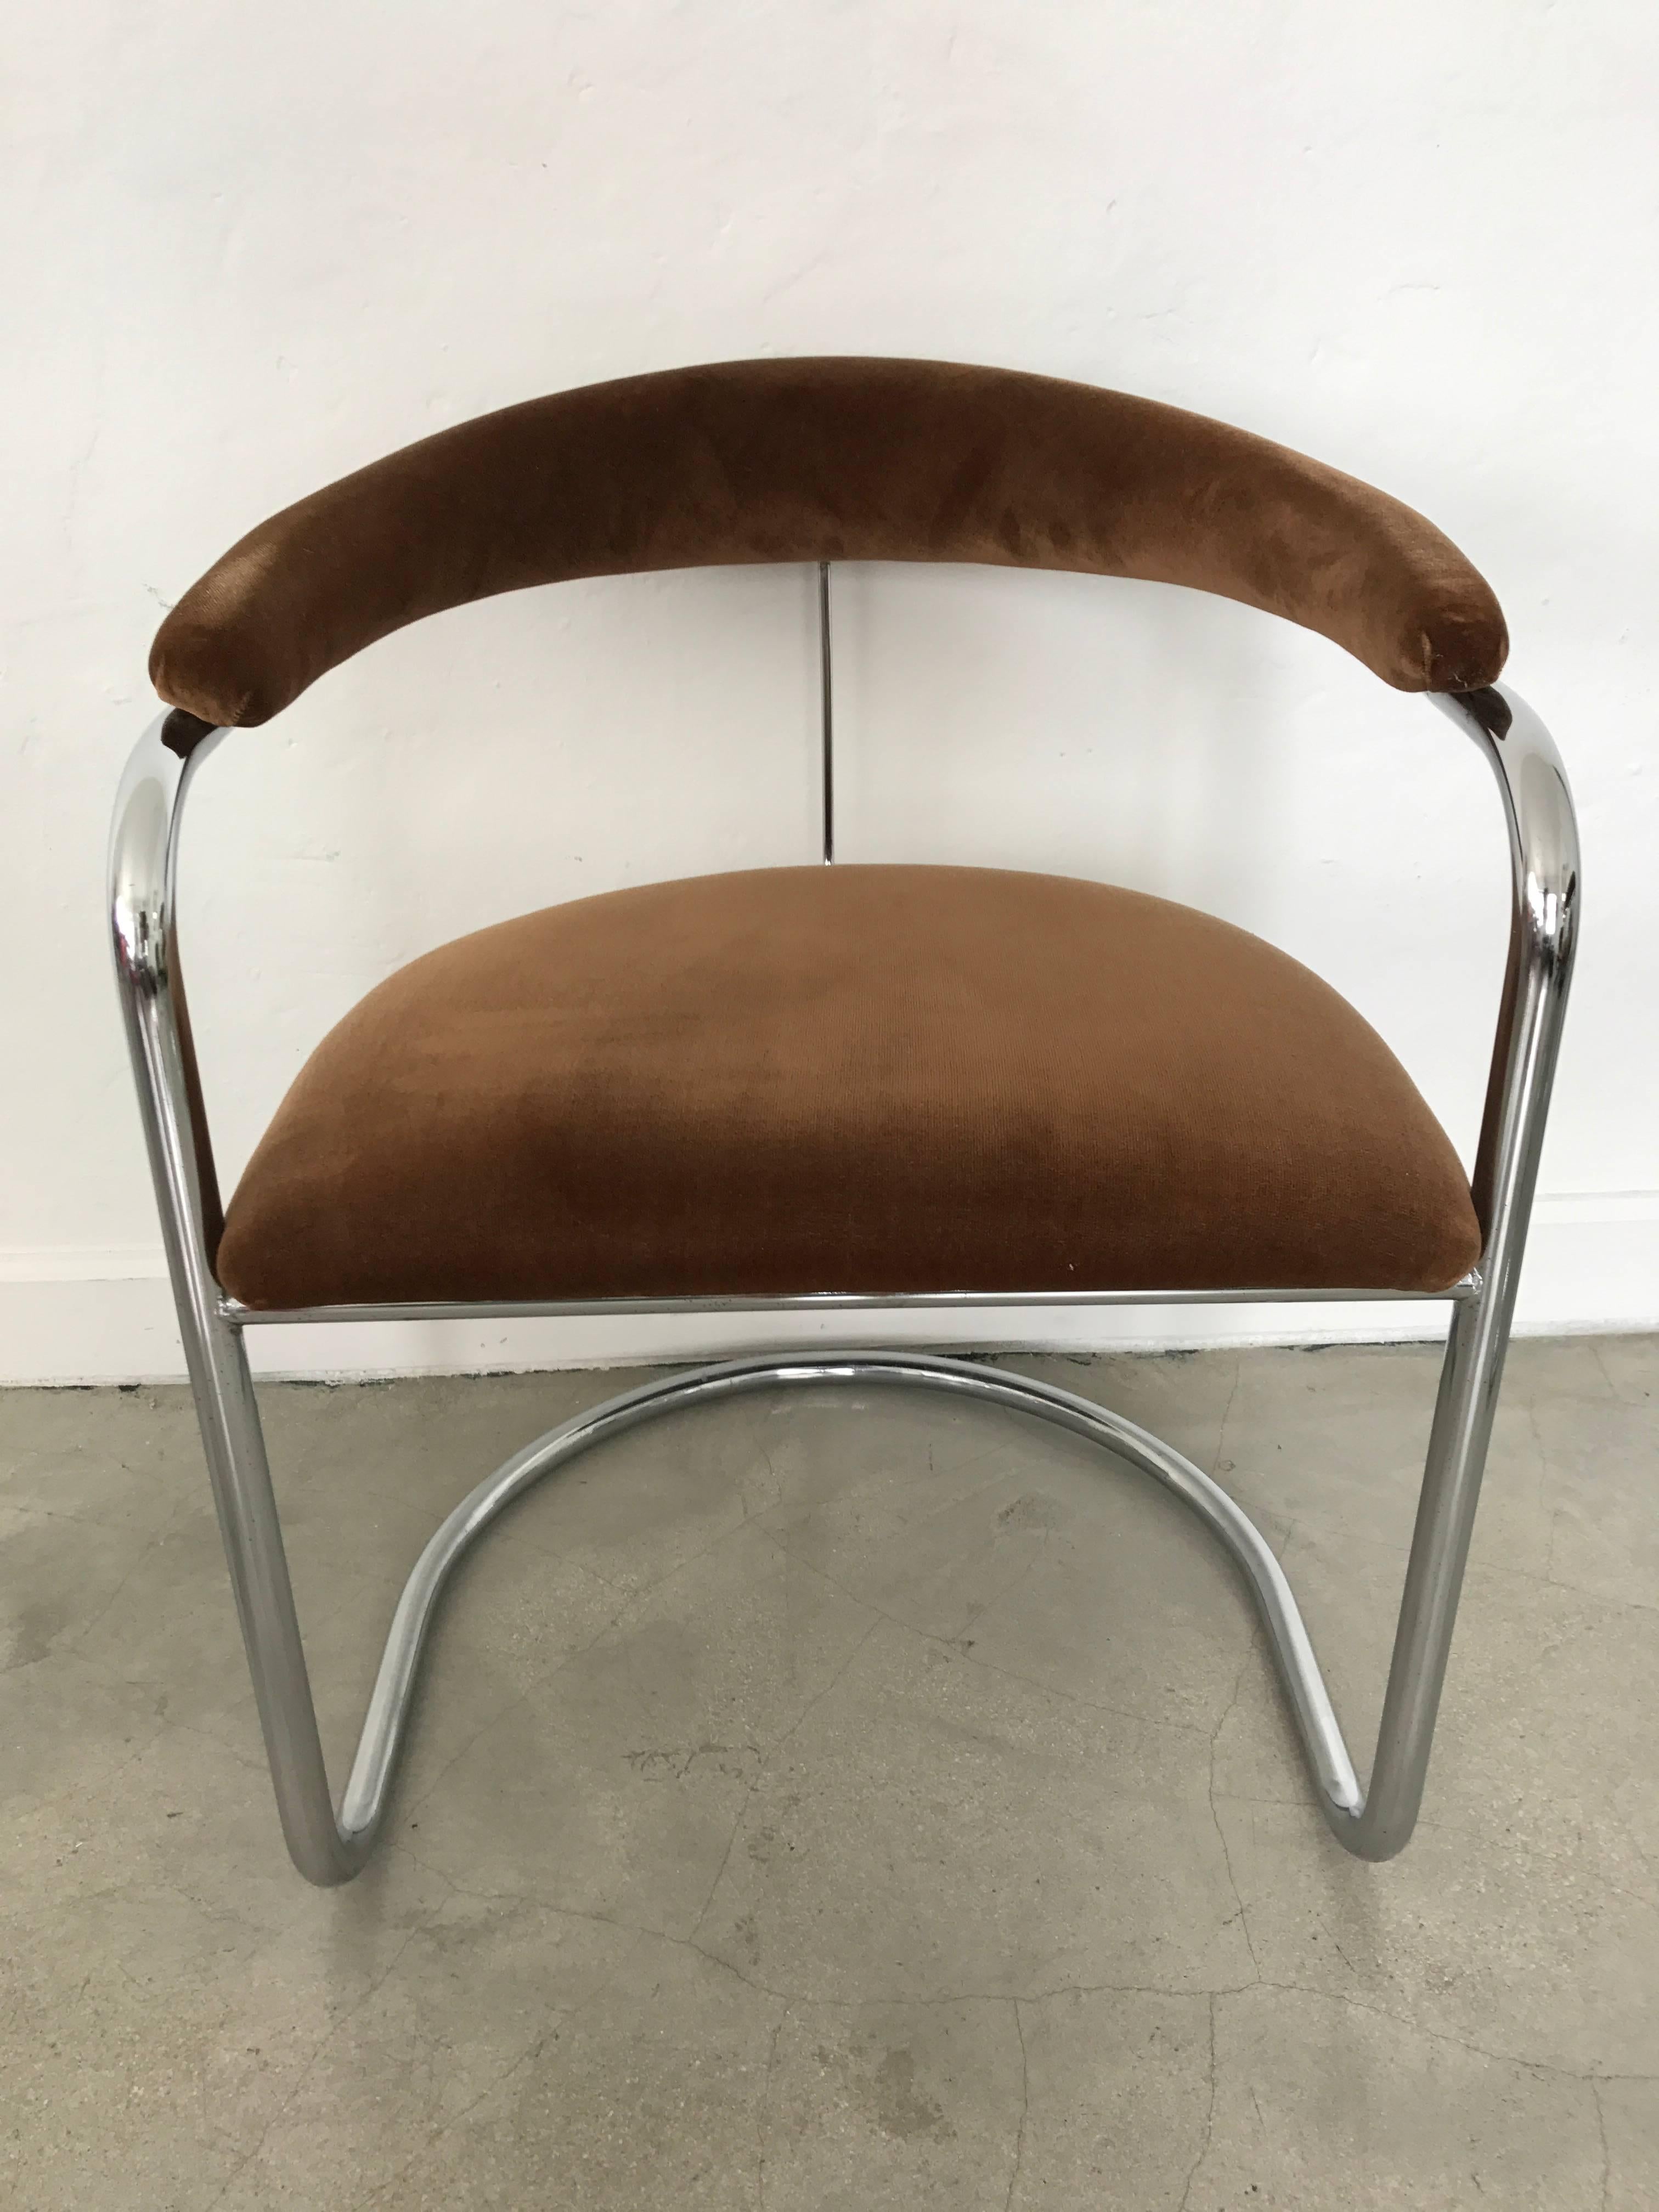 Chrome and brown velvet arm chairs by Anton Lorenz for Thonet. Model SS33.